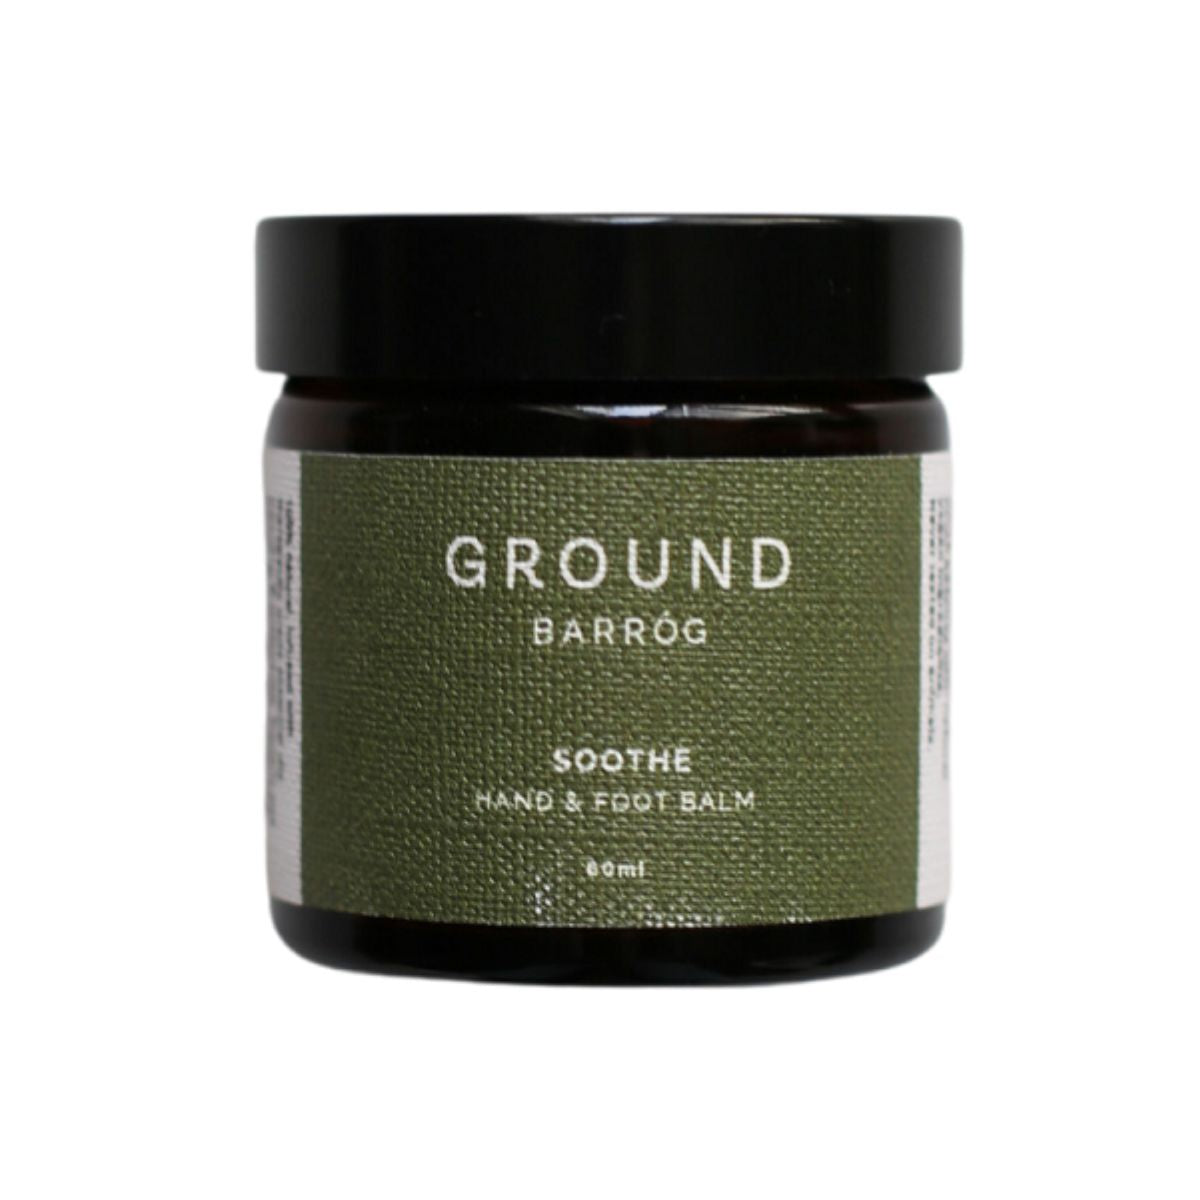 GROUND BARRÓG Soothe Hand & Foot Balm (Cancer Care Products)